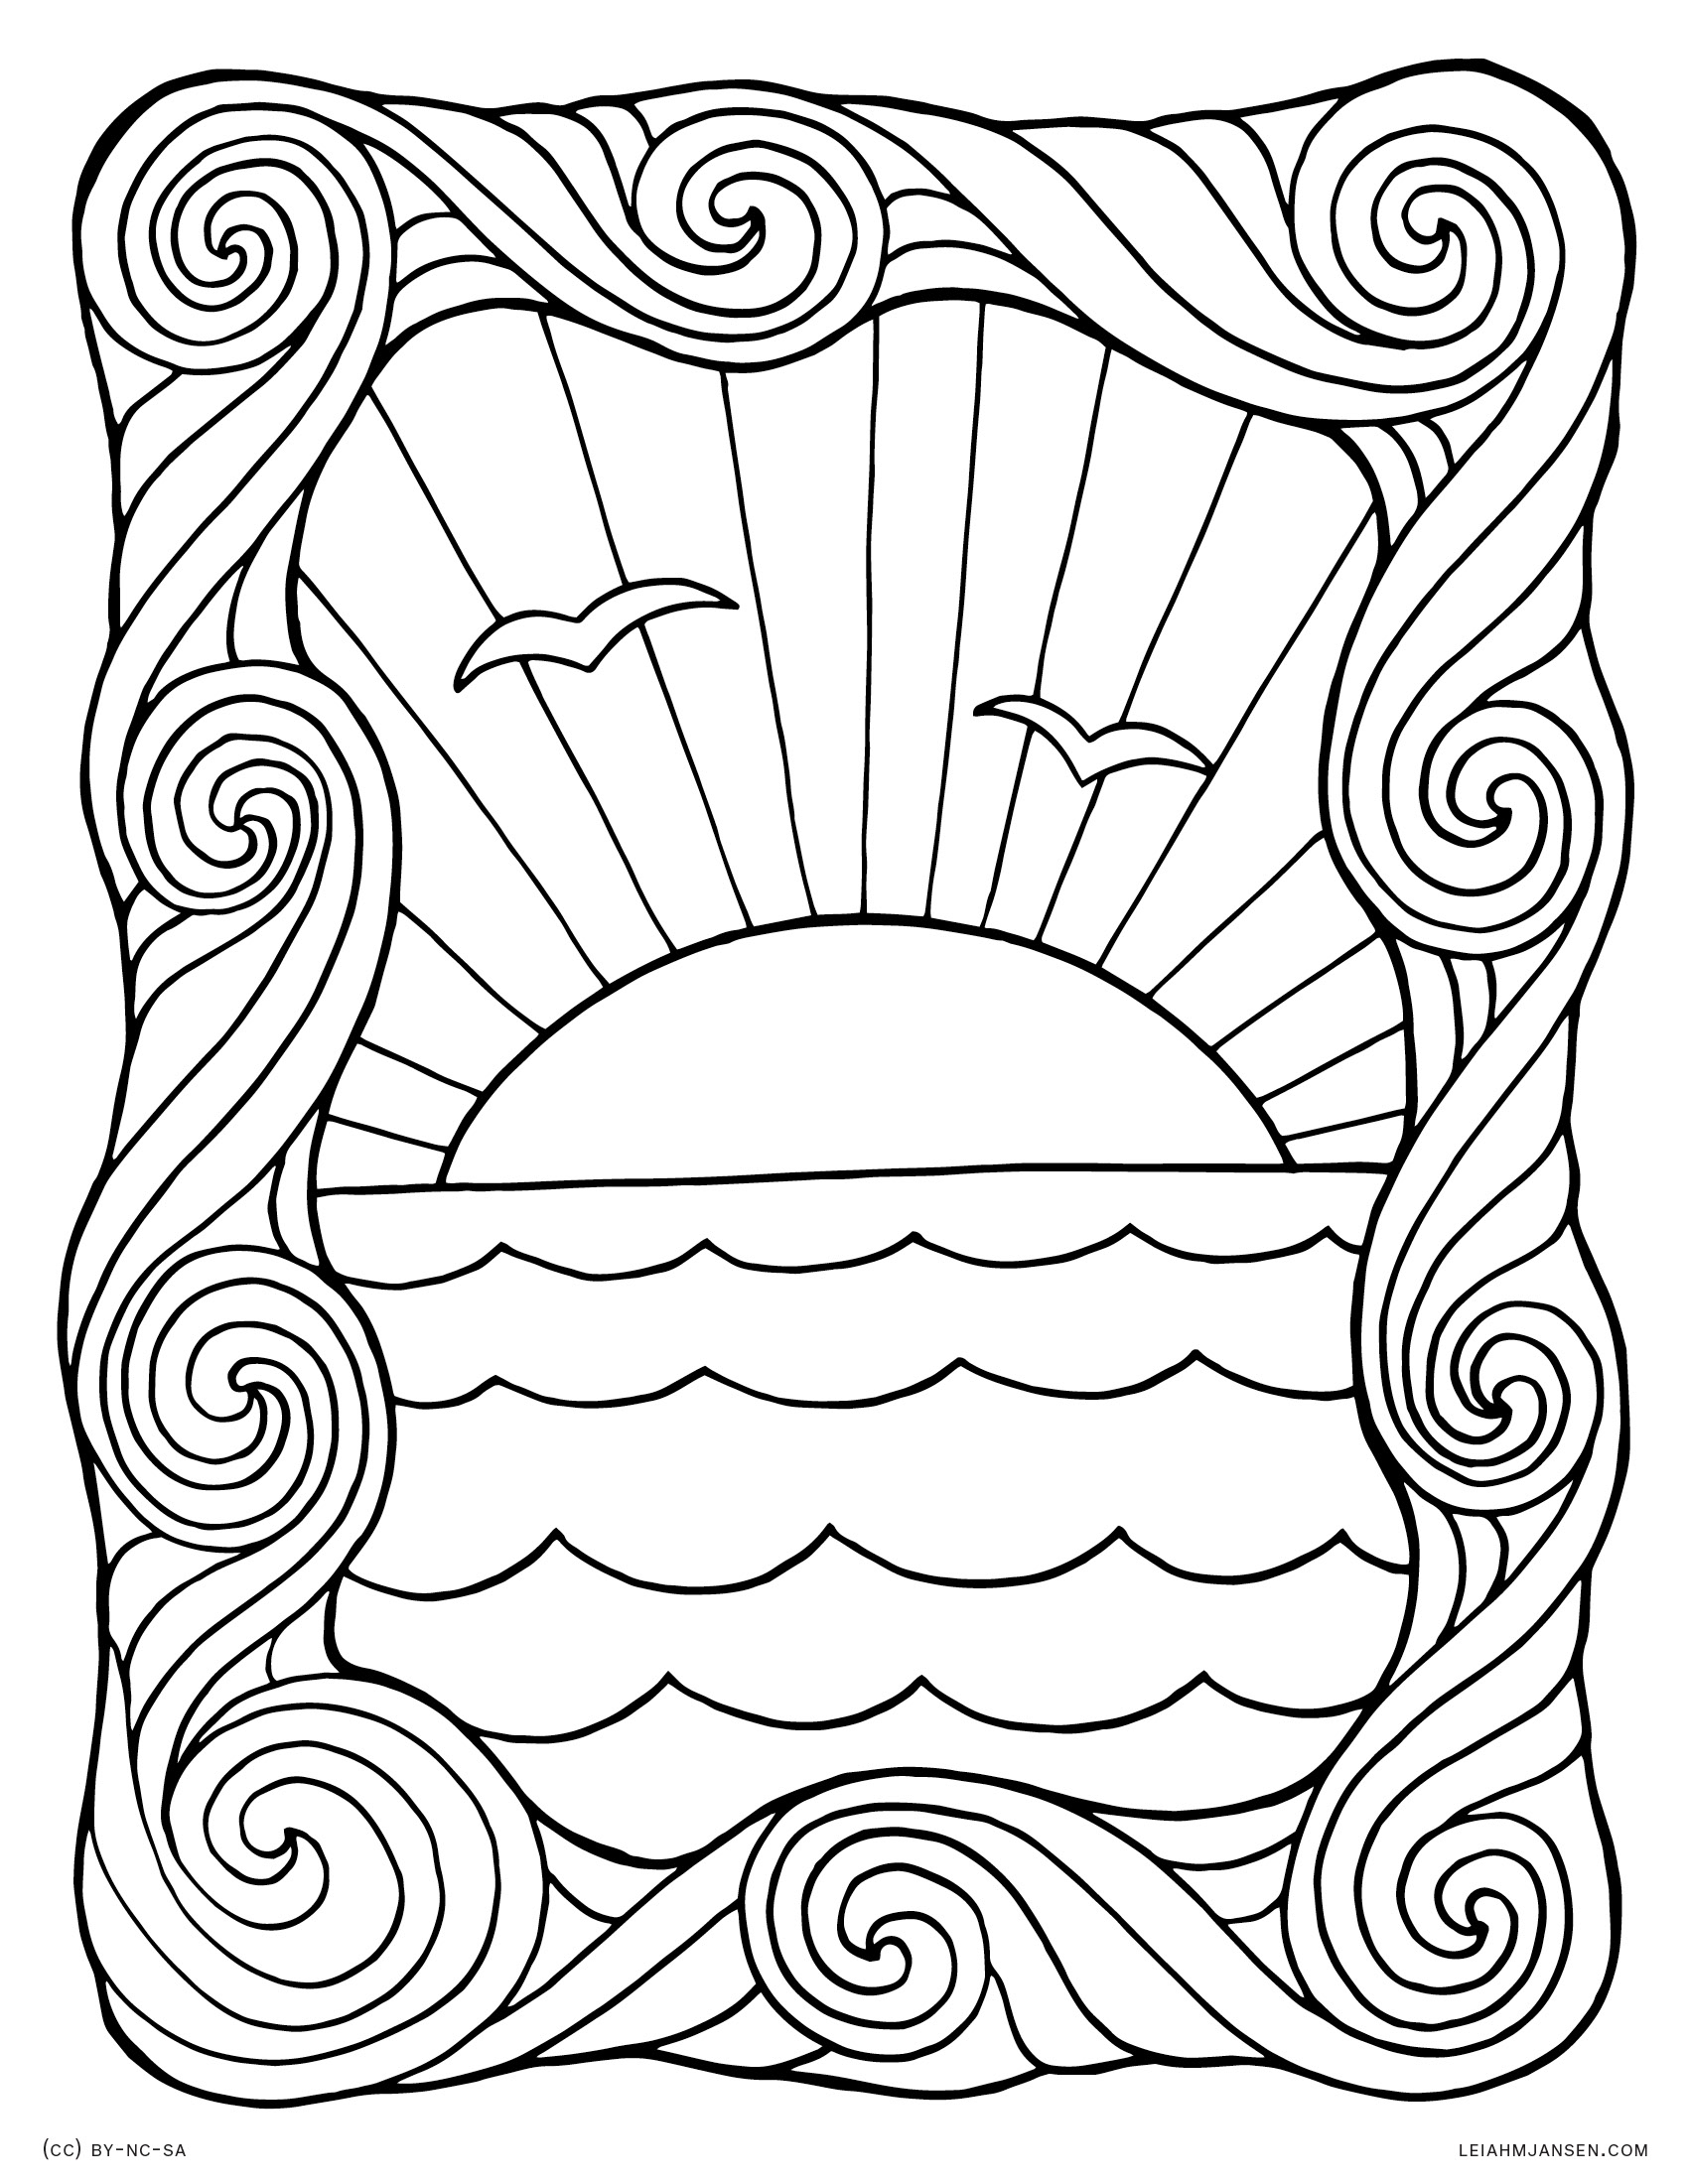 Water Waves Coloring Pages at Free printable